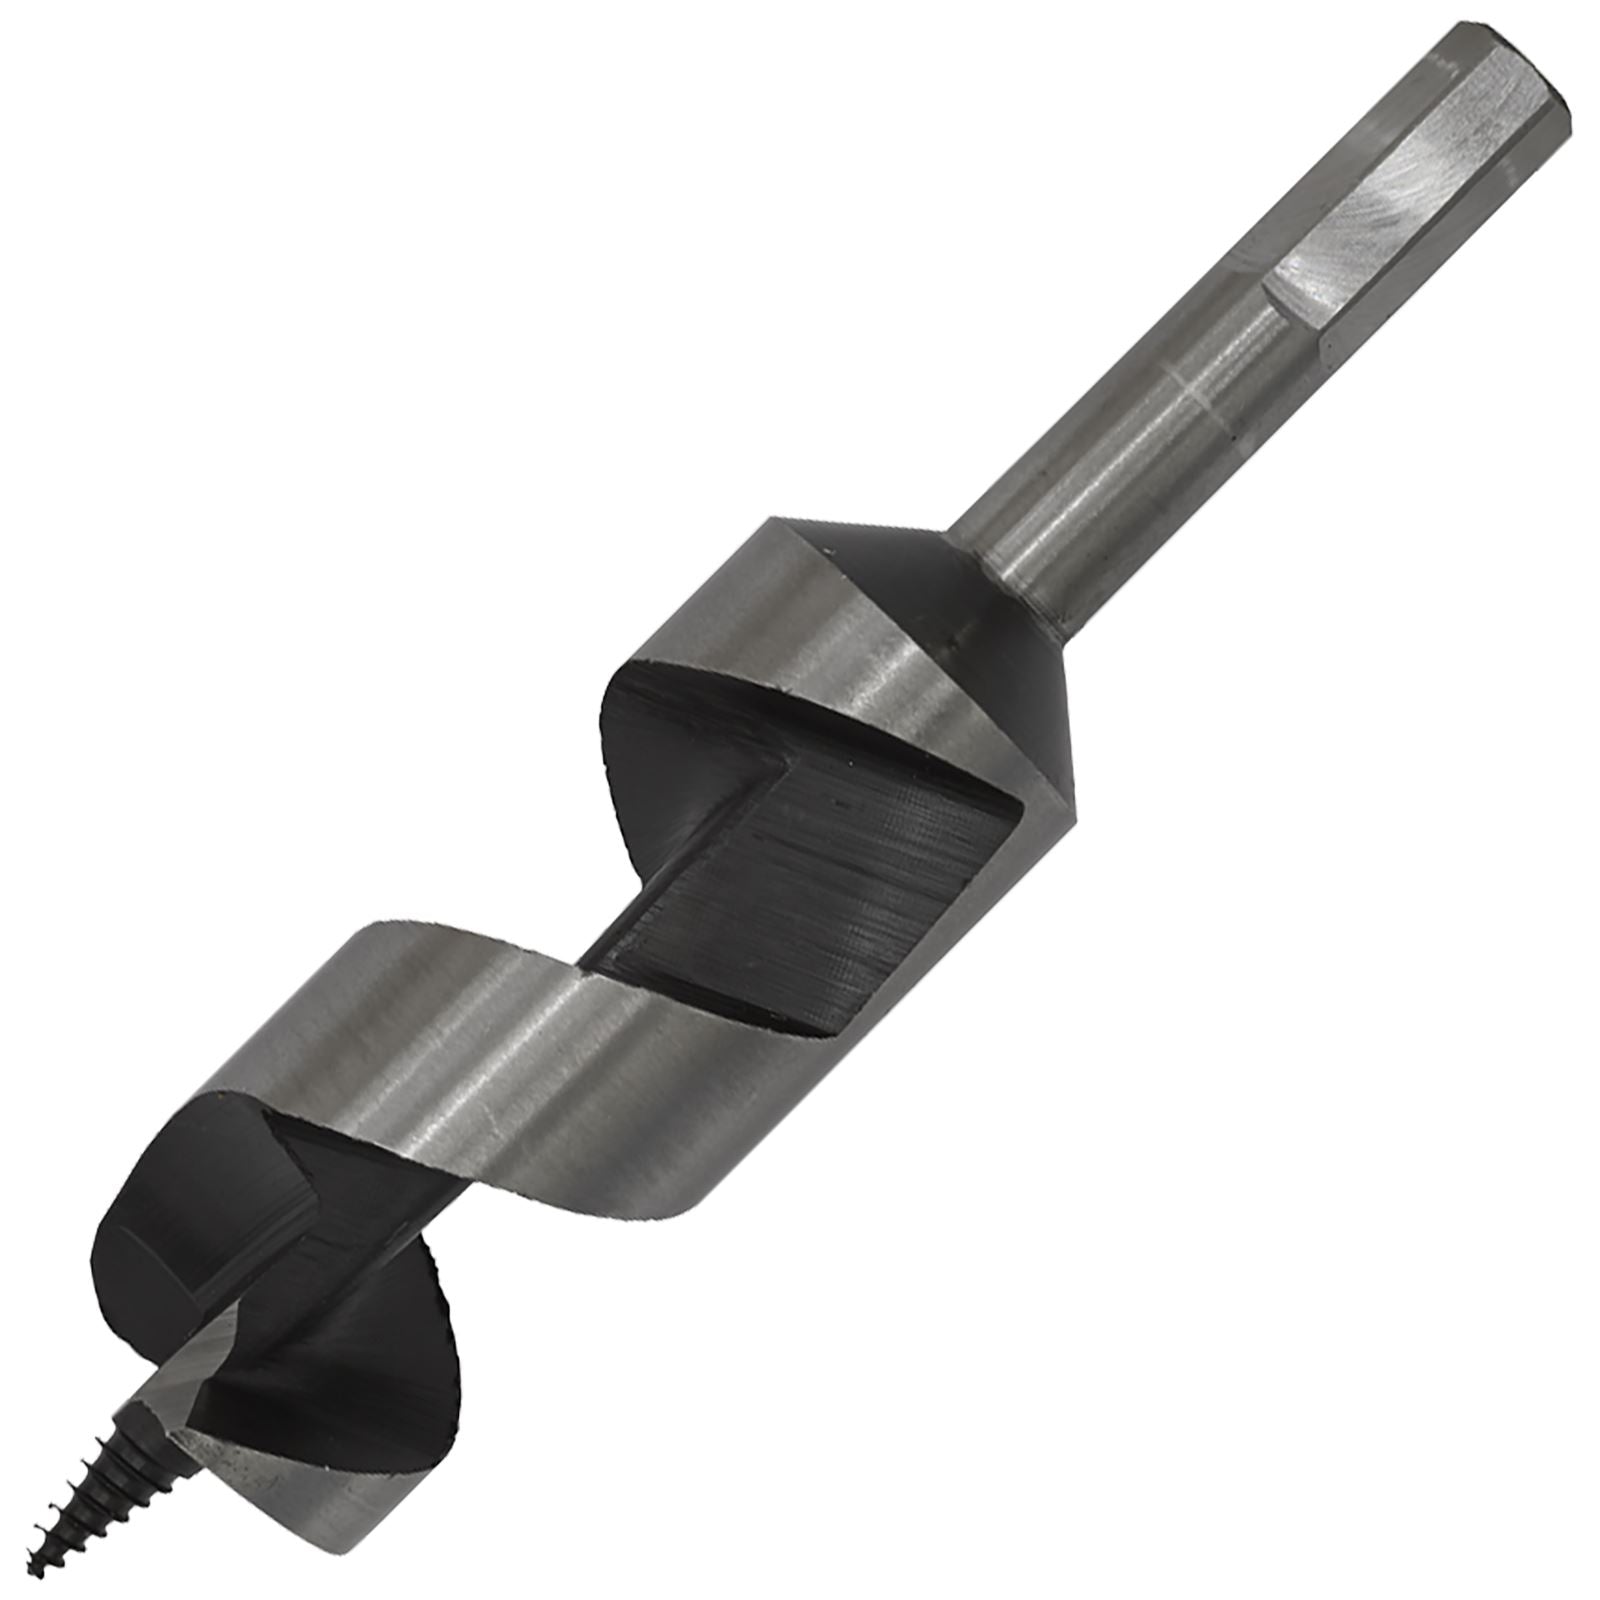 Worksafe by Sealey Auger Wood Drill Bit 32mm x 155mm